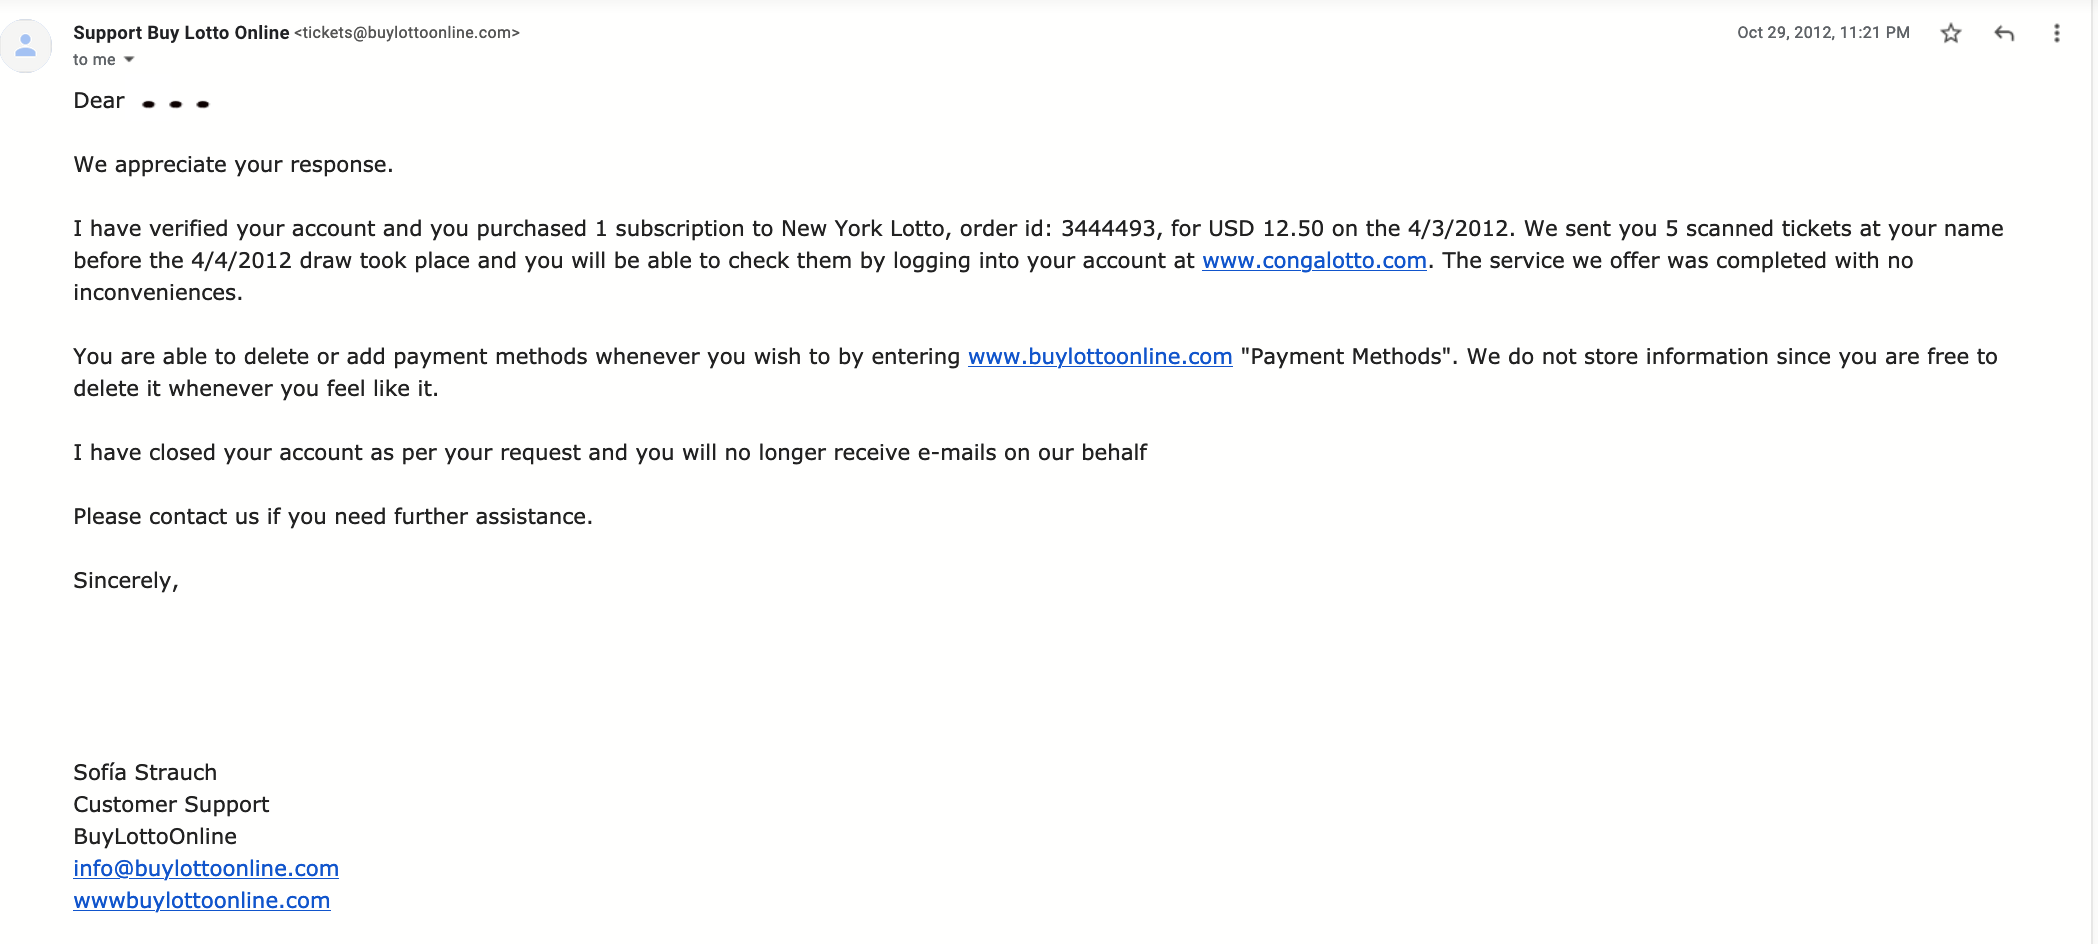 Email sent by Sofía Strauch, of "BuyLottoOnline"